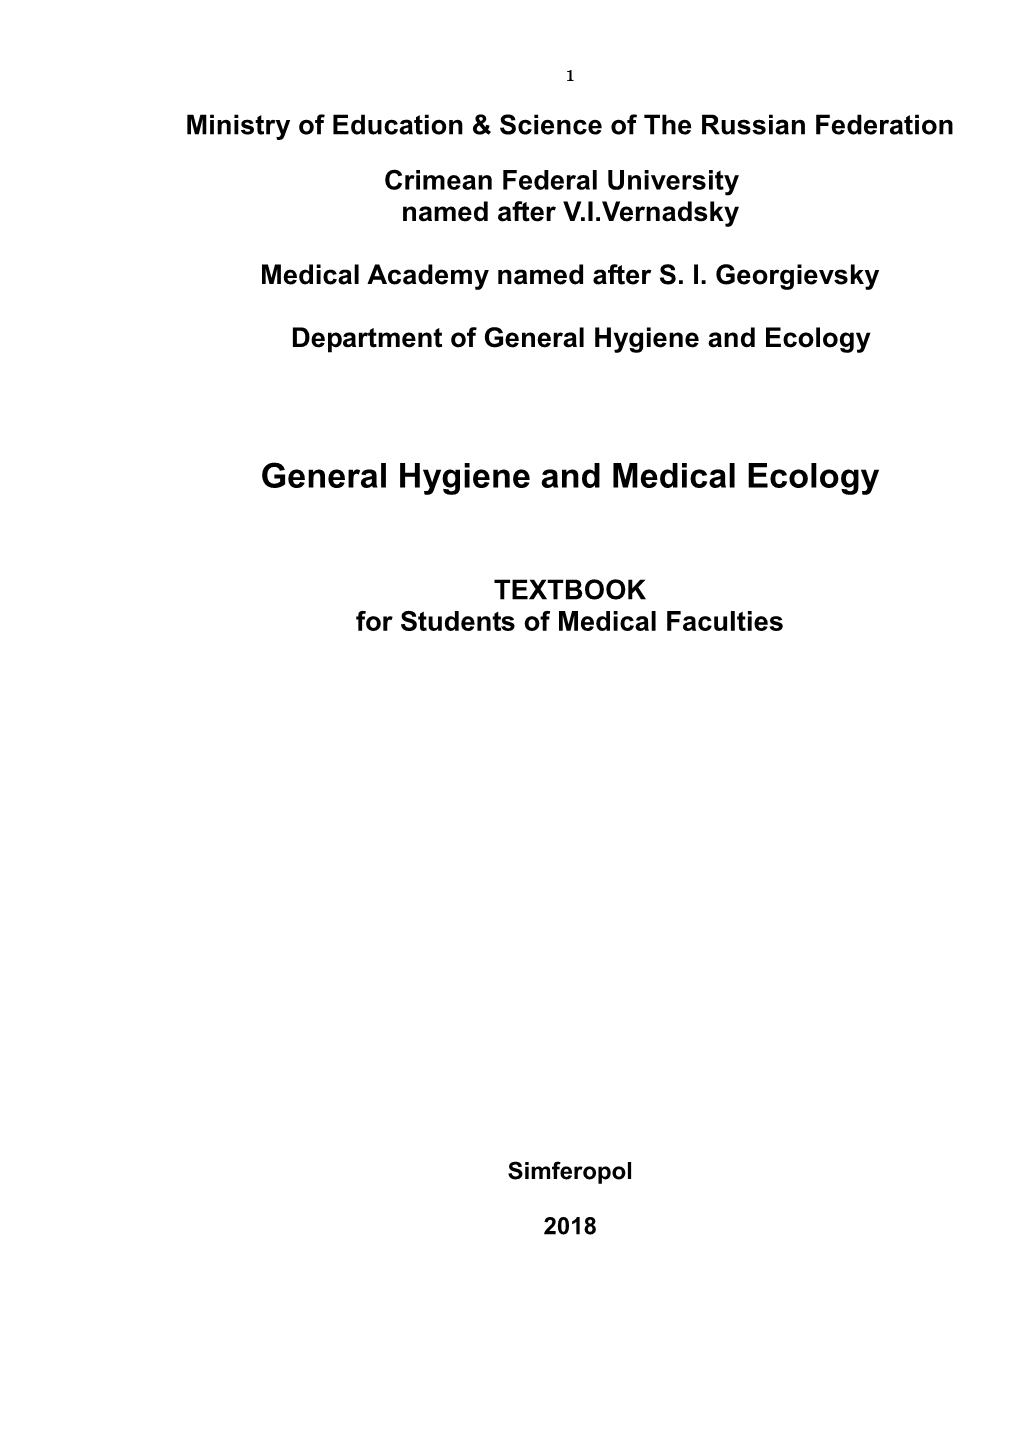 General Hygiene and Medical Ecology